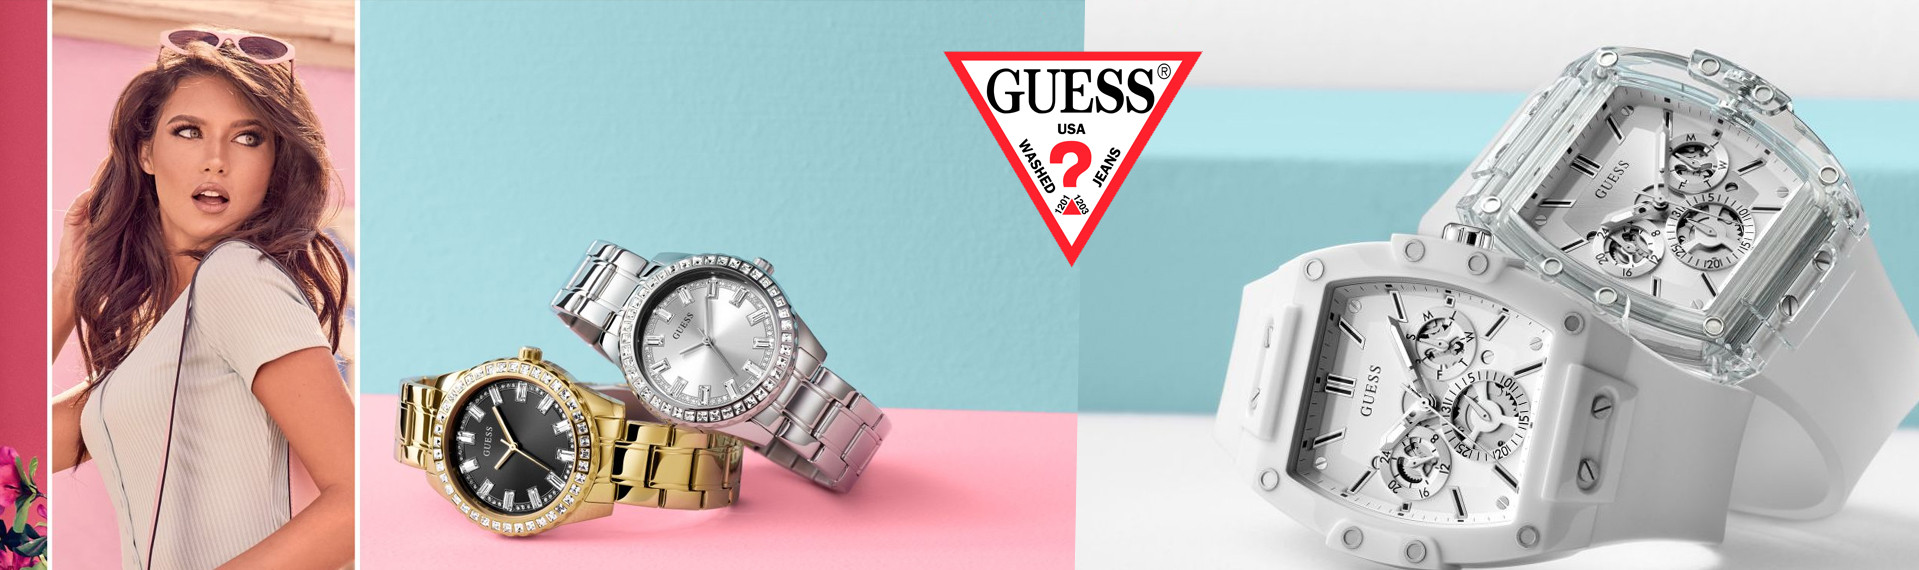 Guess collection